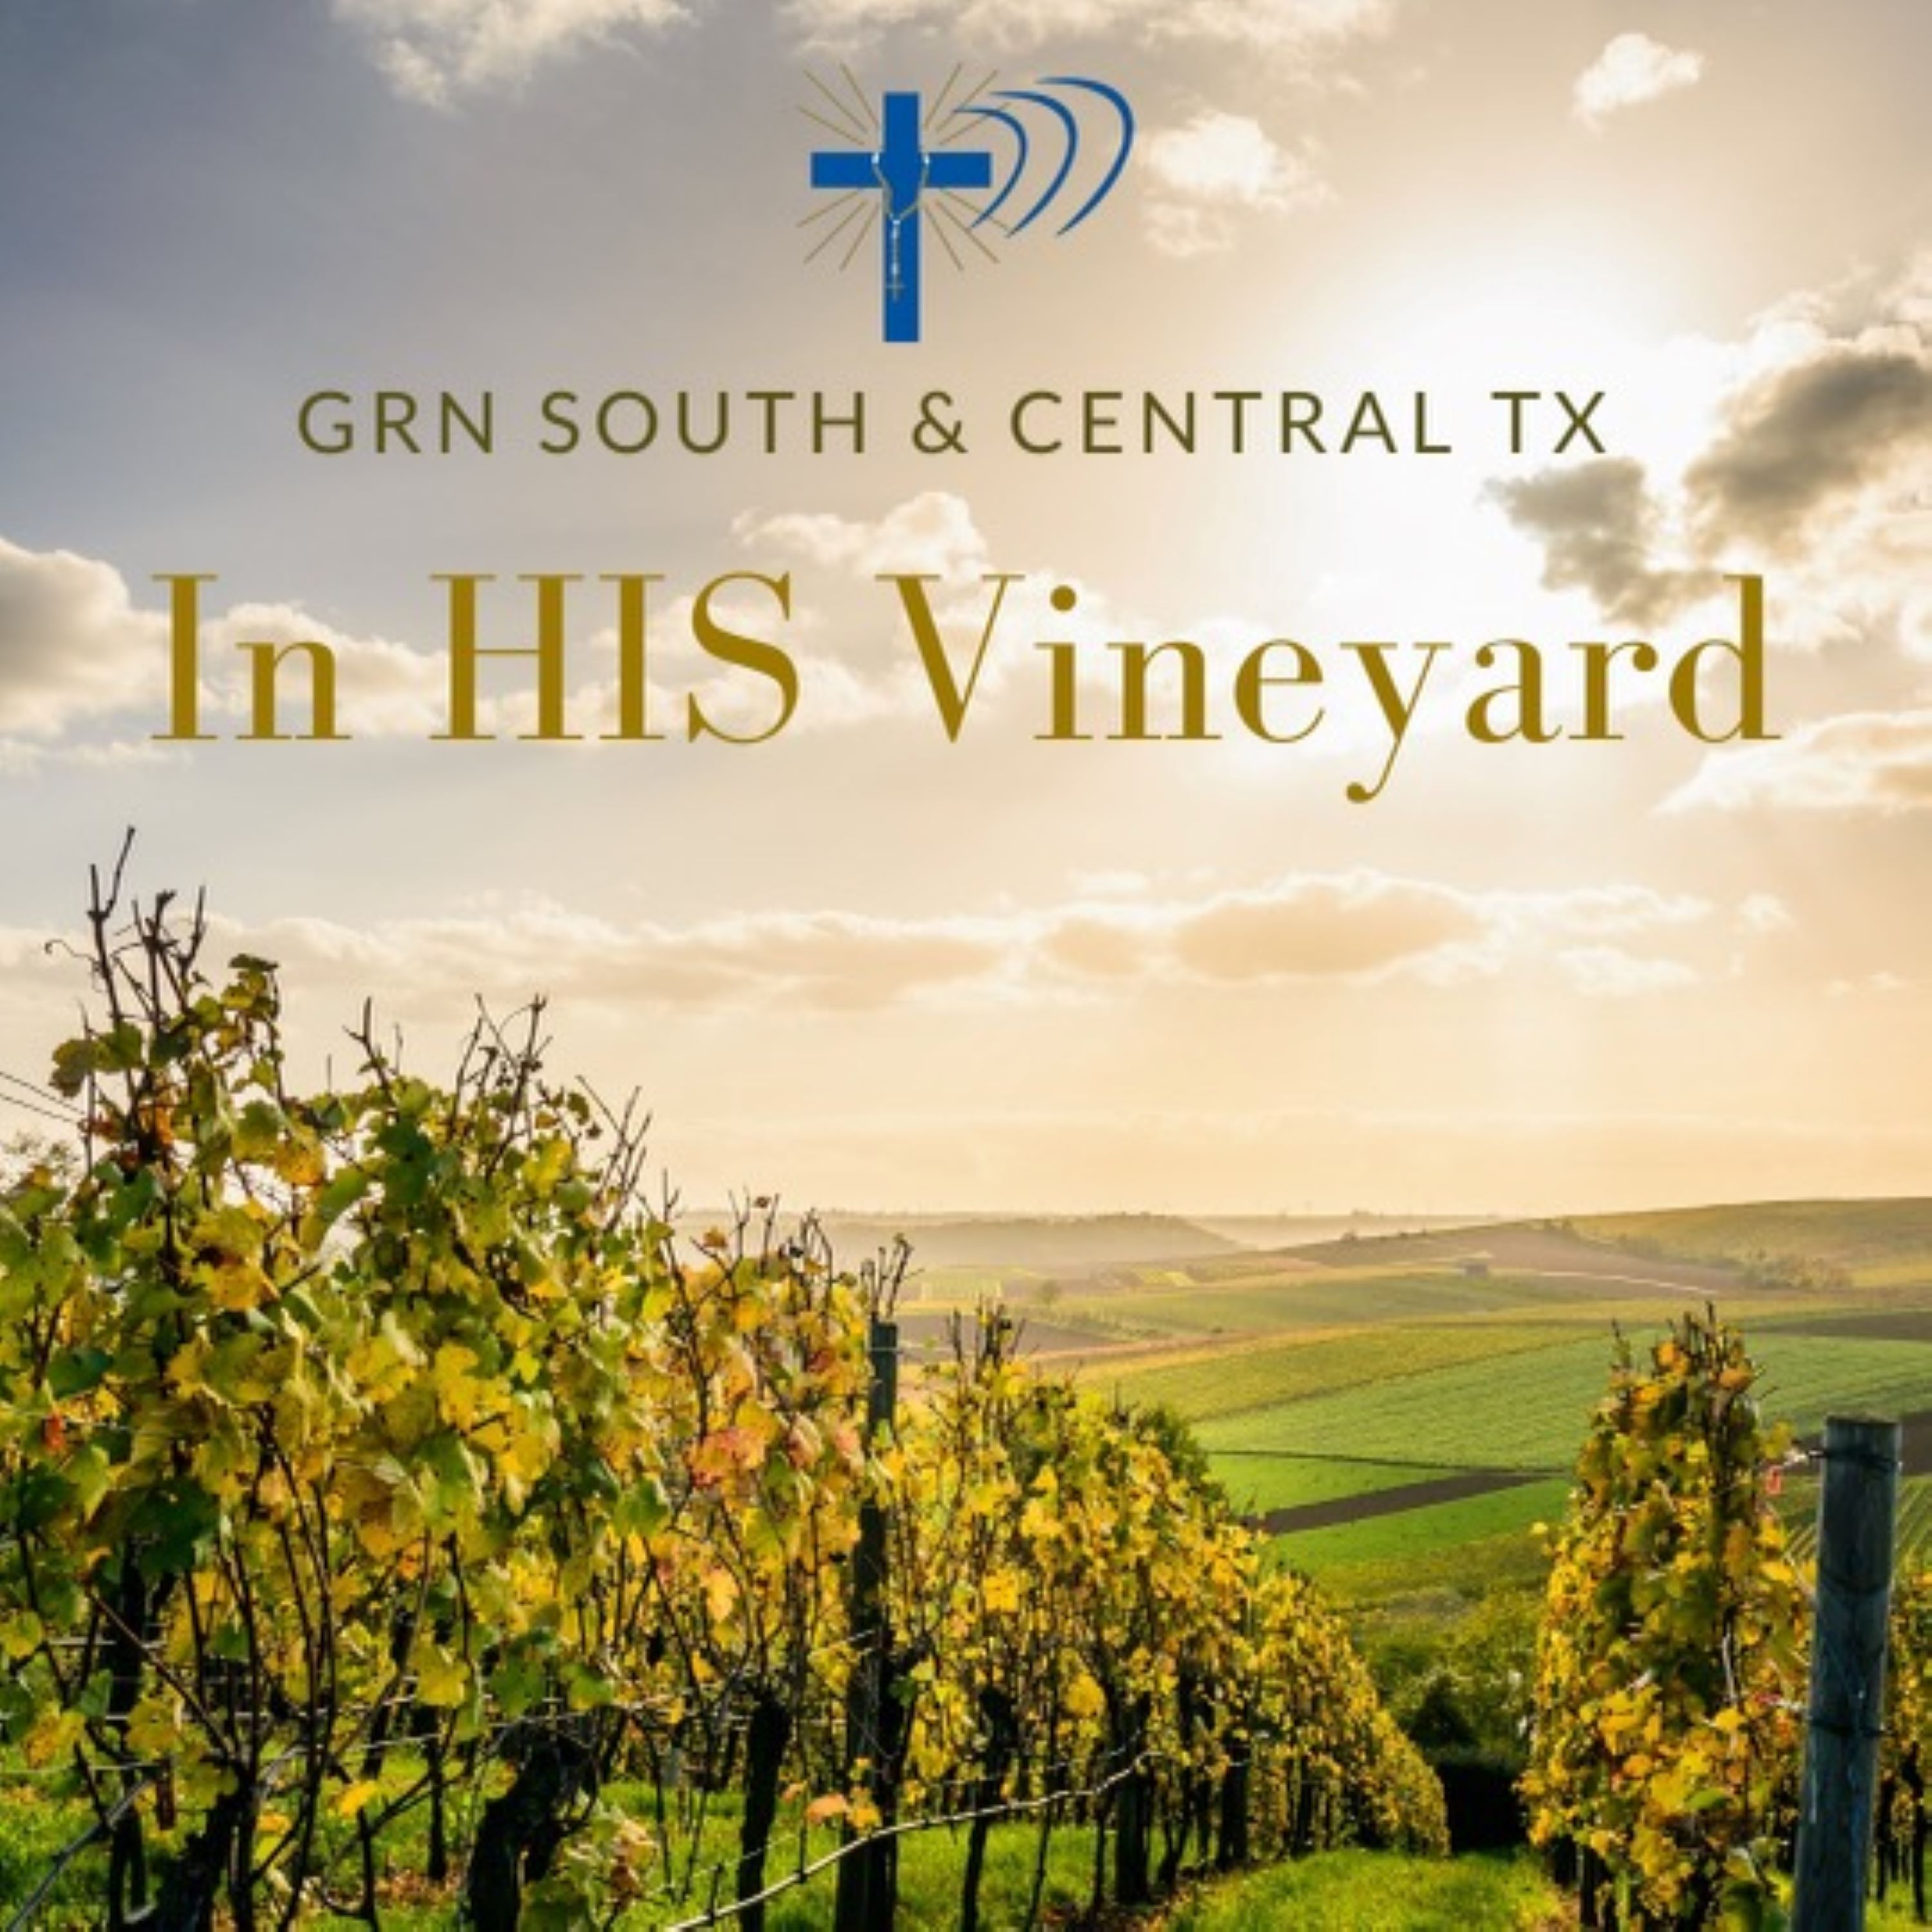 In HIS Vineyard - Monday February 20, 2023